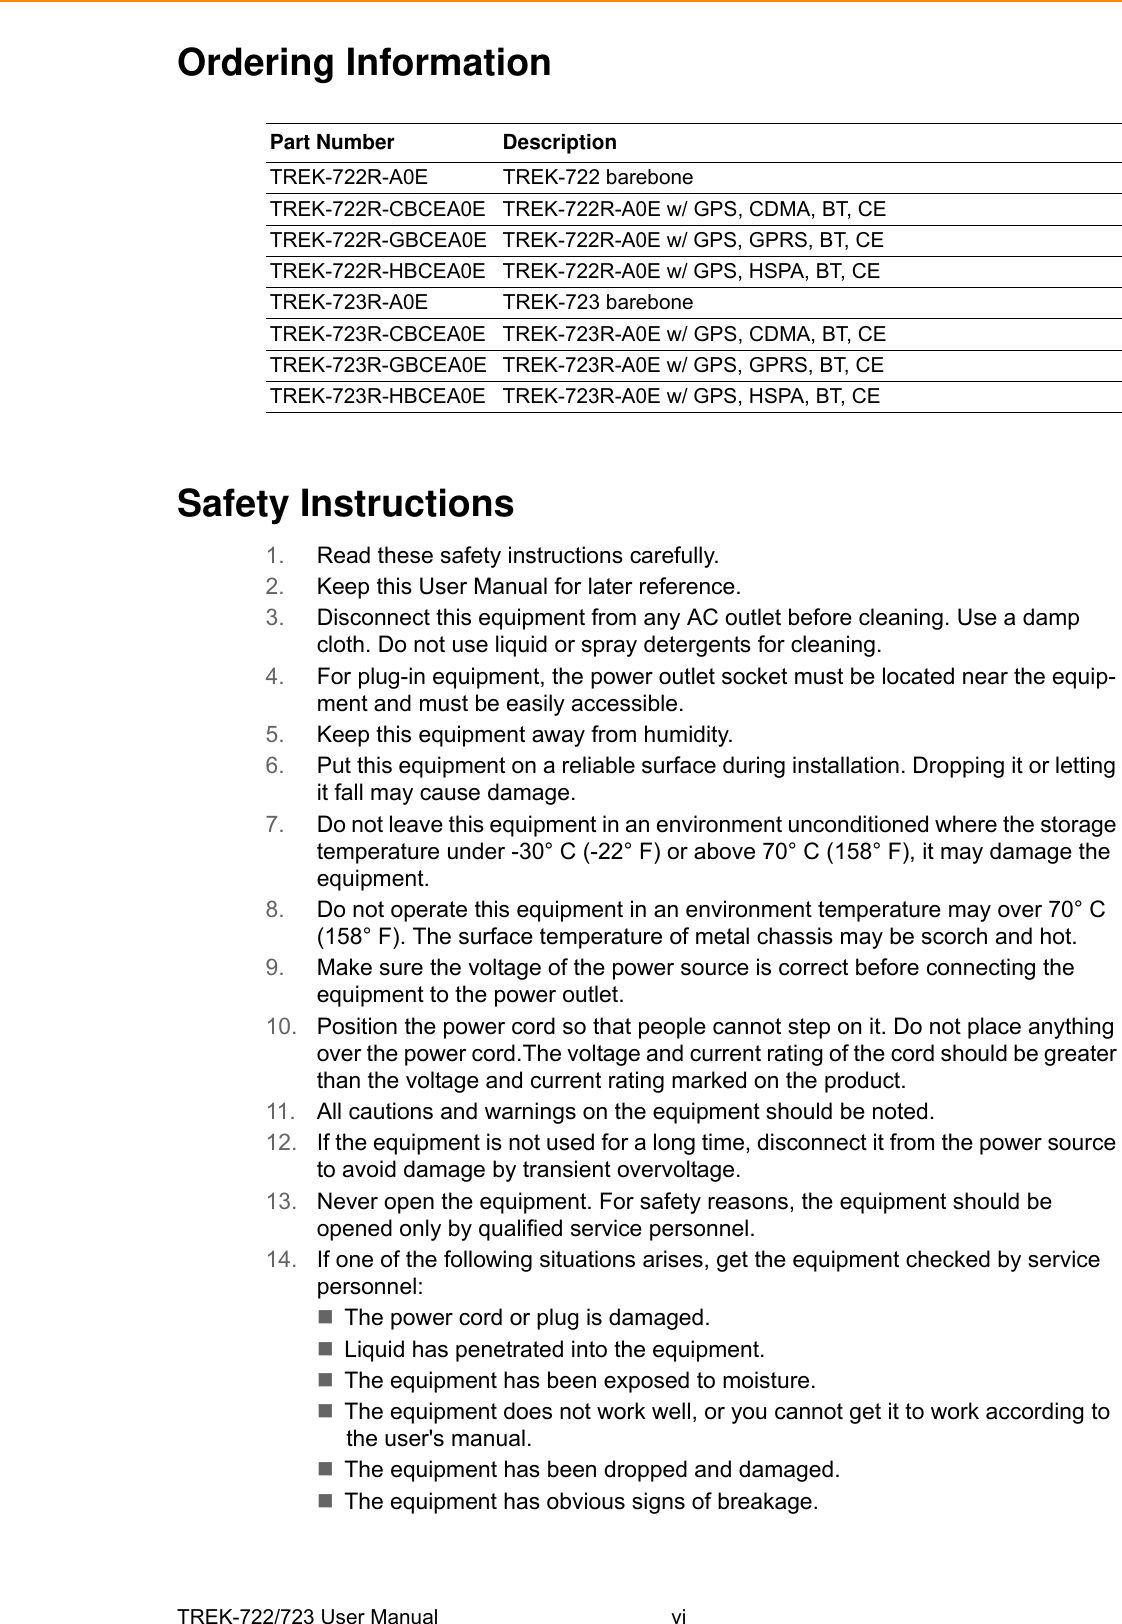 TREK-722/723 User Manual viOrdering InformationSafety Instructions1. Read these safety instructions carefully.2. Keep this User Manual for later reference.3. Disconnect this equipment from any AC outlet before cleaning. Use a damp cloth. Do not use liquid or spray detergents for cleaning.4. For plug-in equipment, the power outlet socket must be located near the equip-ment and must be easily accessible.5. Keep this equipment away from humidity.6. Put this equipment on a reliable surface during installation. Dropping it or letting it fall may cause damage.7. Do not leave this equipment in an environment unconditioned where the storage temperature under -30° C (-22° F) or above 70° C (158° F), it may damage the equipment. 8. Do not operate this equipment in an environment temperature may over 70° C (158° F). The surface temperature of metal chassis may be scorch and hot.9. Make sure the voltage of the power source is correct before connecting the equipment to the power outlet.10. Position the power cord so that people cannot step on it. Do not place anything over the power cord.The voltage and current rating of the cord should be greater than the voltage and current rating marked on the product.11. All cautions and warnings on the equipment should be noted.12. If the equipment is not used for a long time, disconnect it from the power source to avoid damage by transient overvoltage.13. Never open the equipment. For safety reasons, the equipment should be opened only by qualified service personnel.14. If one of the following situations arises, get the equipment checked by service personnel:The power cord or plug is damaged.Liquid has penetrated into the equipment.The equipment has been exposed to moisture.The equipment does not work well, or you cannot get it to work according to the user&apos;s manual.The equipment has been dropped and damaged.The equipment has obvious signs of breakage.Part Number  DescriptionTREK-722R-A0E TREK-722 bareboneTREK-722R-CBCEA0E TREK-722R-A0E w/ GPS, CDMA, BT, CETREK-722R-GBCEA0E  TREK-722R-A0E w/ GPS, GPRS, BT, CETREK-722R-HBCEA0E  TREK-722R-A0E w/ GPS, HSPA, BT, CETREK-723R-A0E TREK-723 bareboneTREK-723R-CBCEA0E TREK-723R-A0E w/ GPS, CDMA, BT, CETREK-723R-GBCEA0E  TREK-723R-A0E w/ GPS, GPRS, BT, CETREK-723R-HBCEA0E  TREK-723R-A0E w/ GPS, HSPA, BT, CE